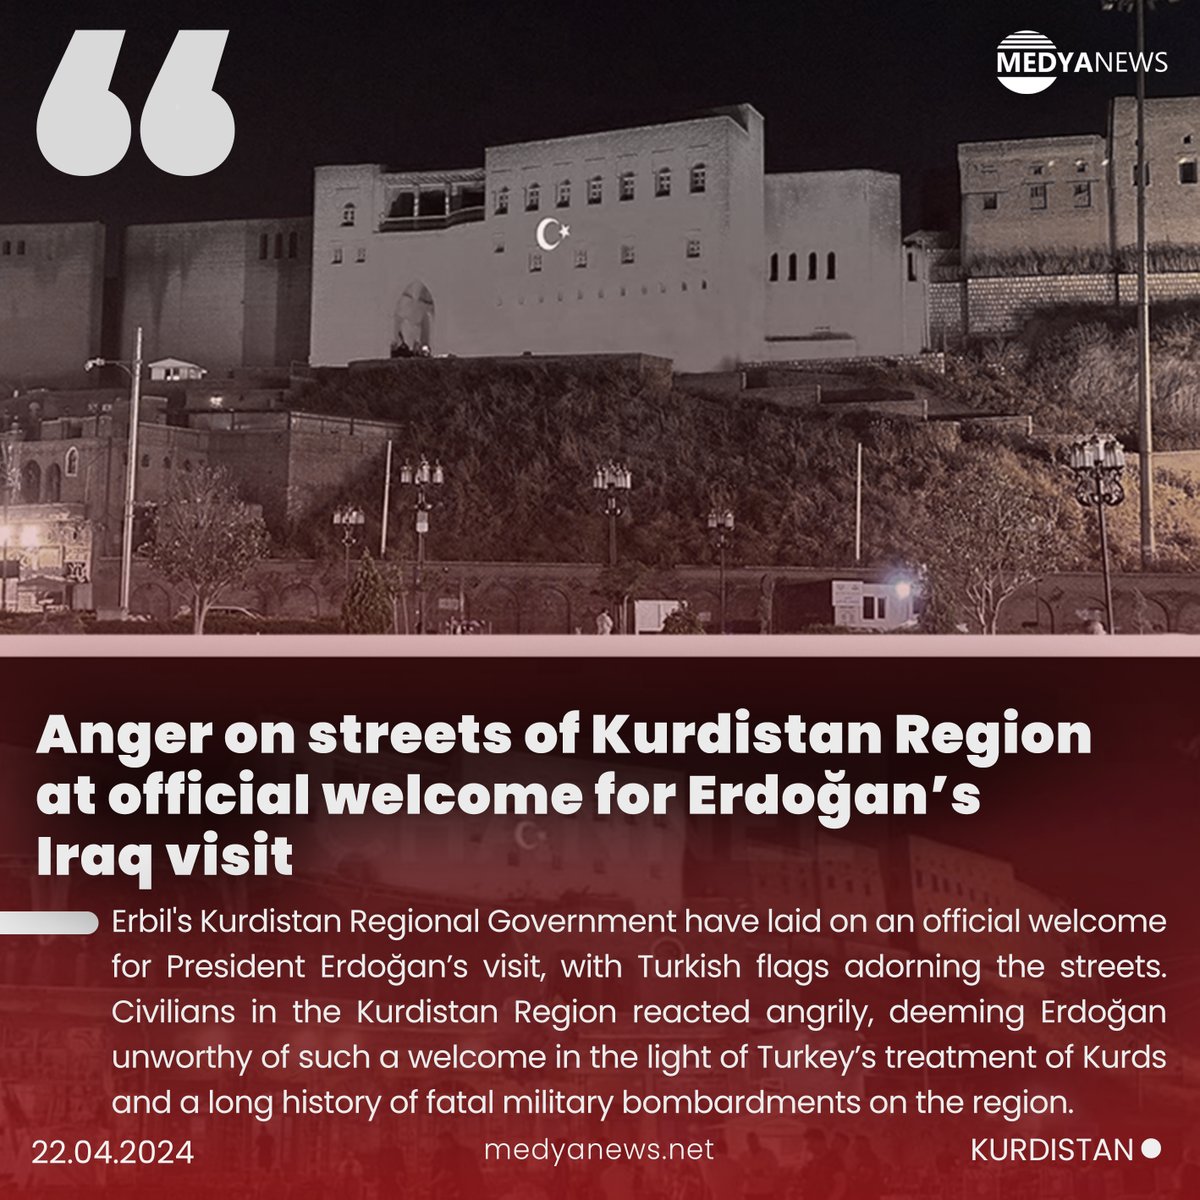 Tensions rise as Erdoğan’s diplomatic mission to #Iraq draws criticism ahead of looming cross-border offensive. #Kurdish factions denounce official welcome, citing #Turkey's military actions in the region. (buff.ly/44hgo4X)